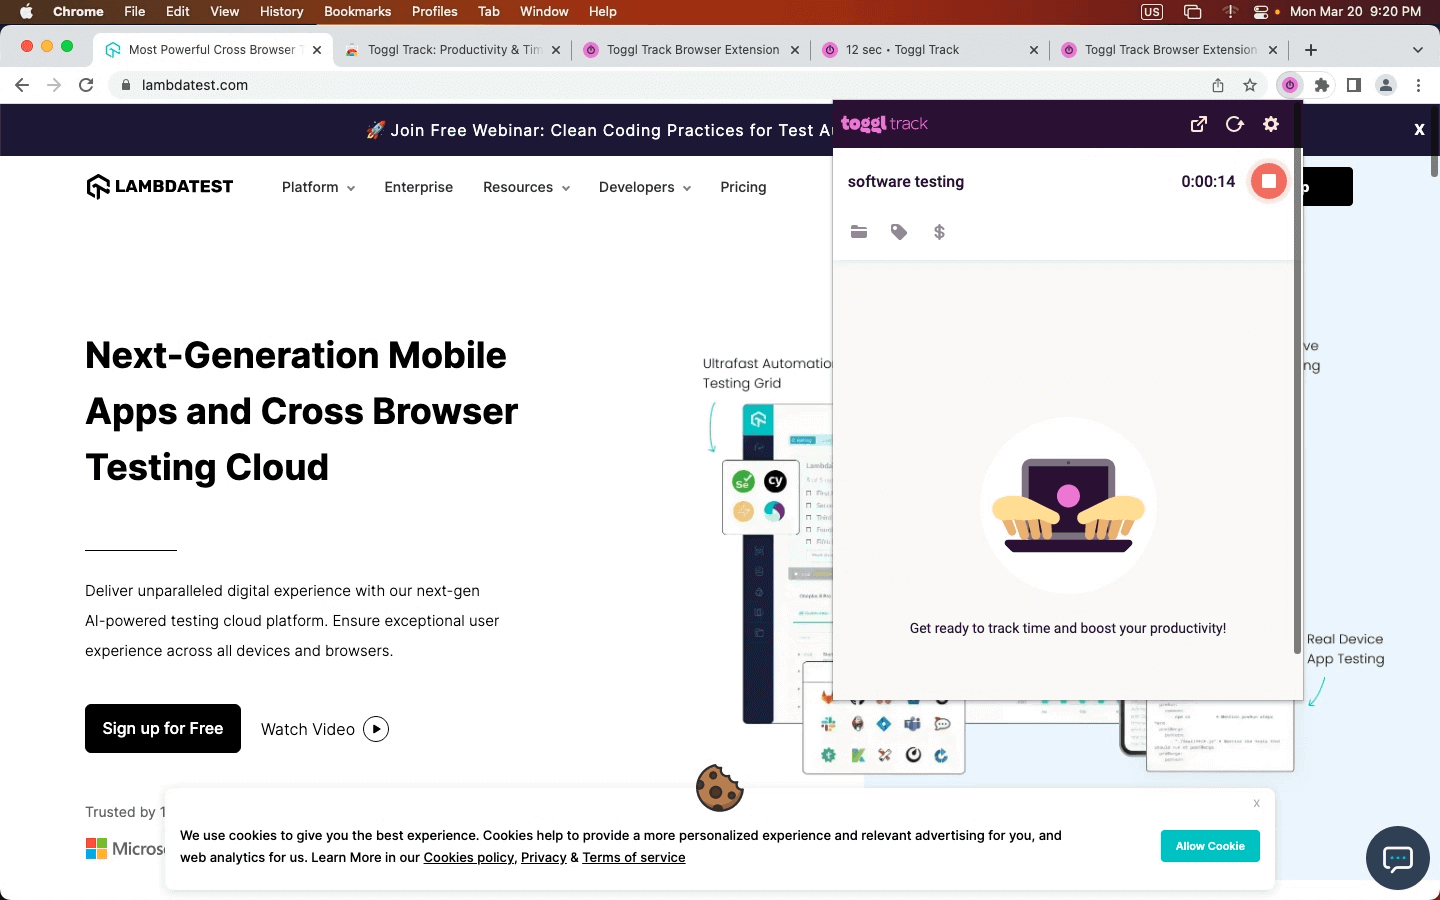 Supercharge (or Simplify) Your Browser: How to Add and Remove Extensions